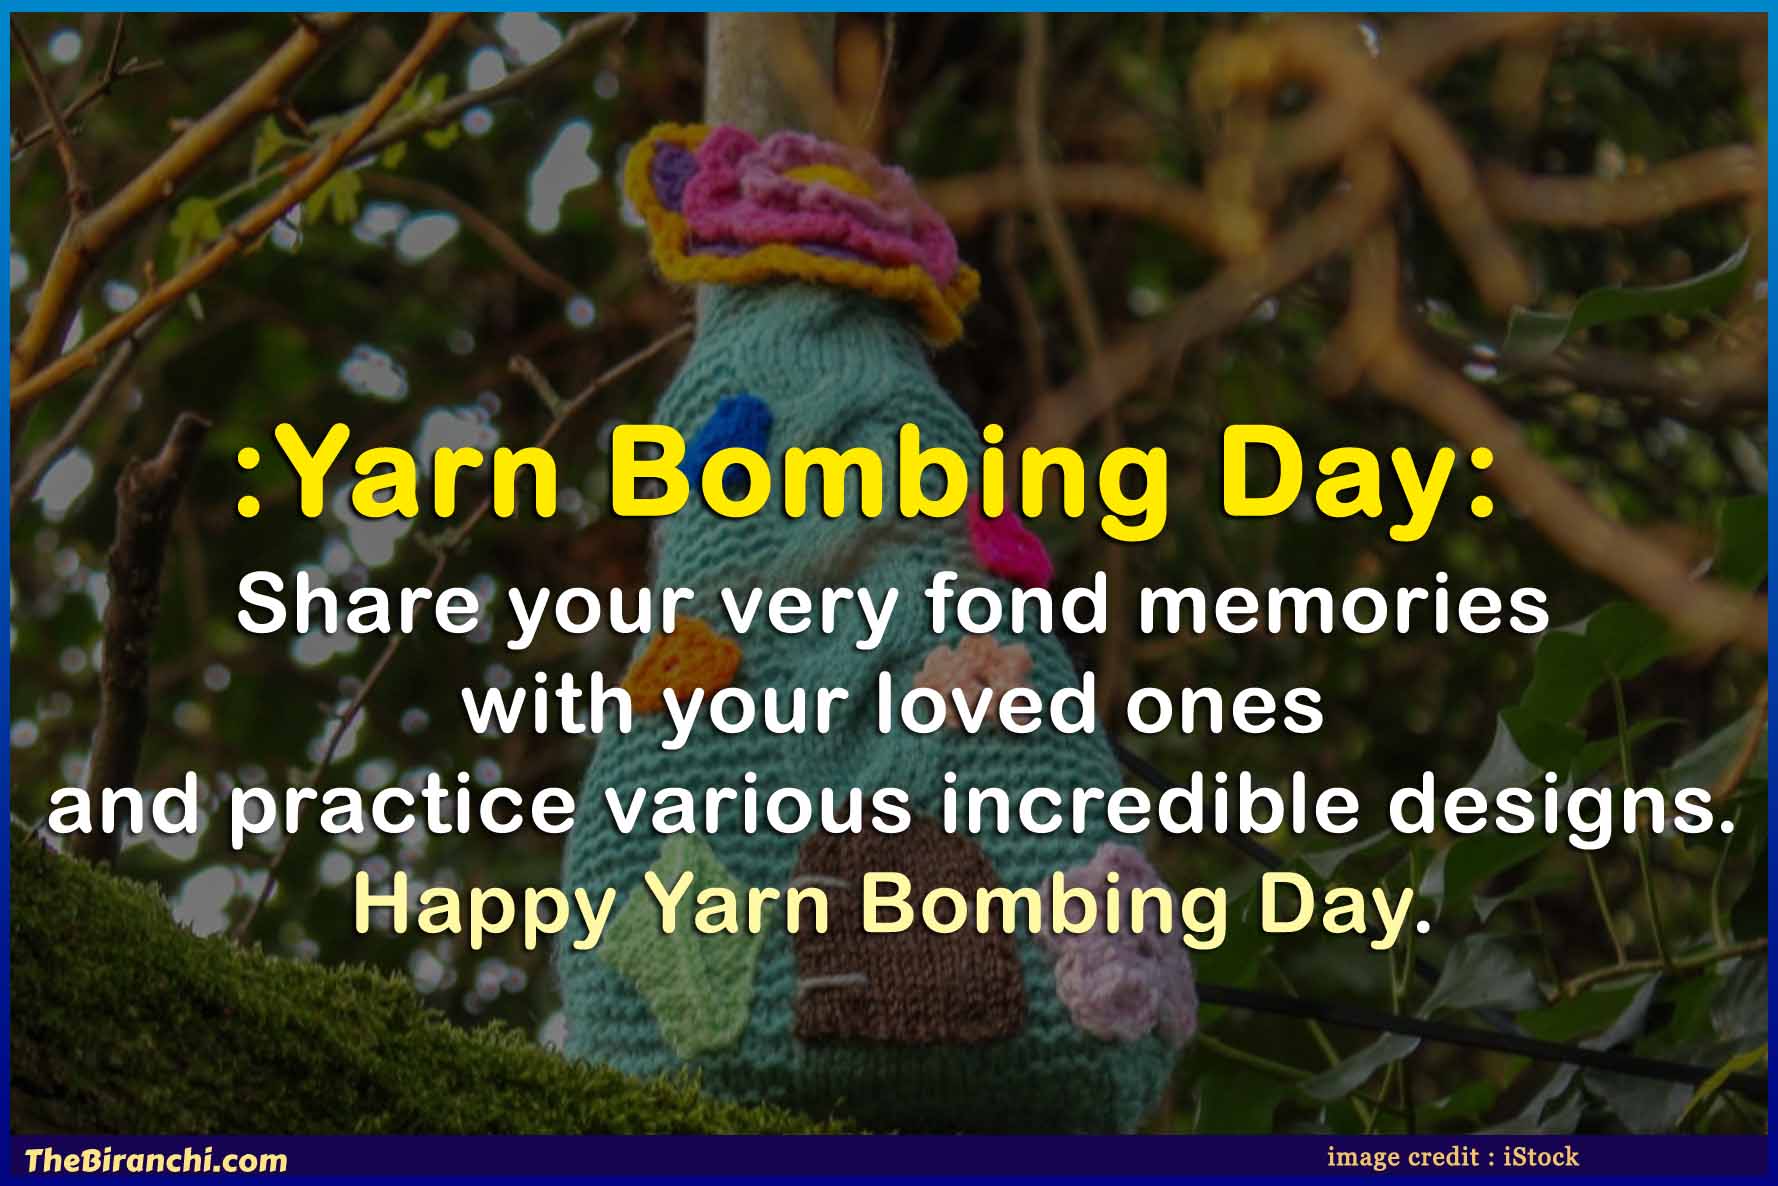 fond-memories-with-your-loved-ones-and-practice-various-incredible-designs-Yarn-Bombing-Day